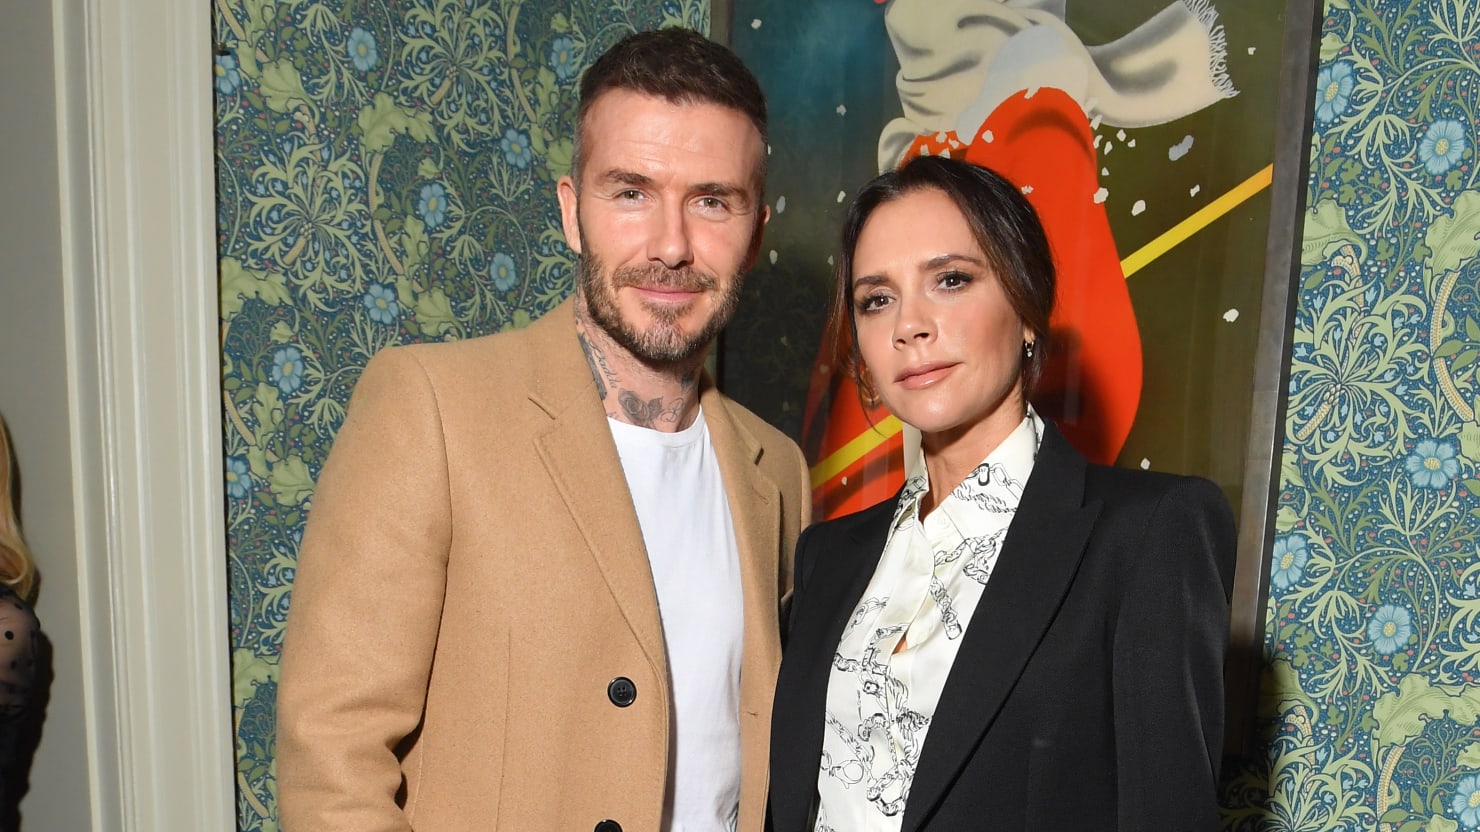 Victoria Beckham Talks 'Most Unhappy' Time in Marriage in 'Beckham' Doc